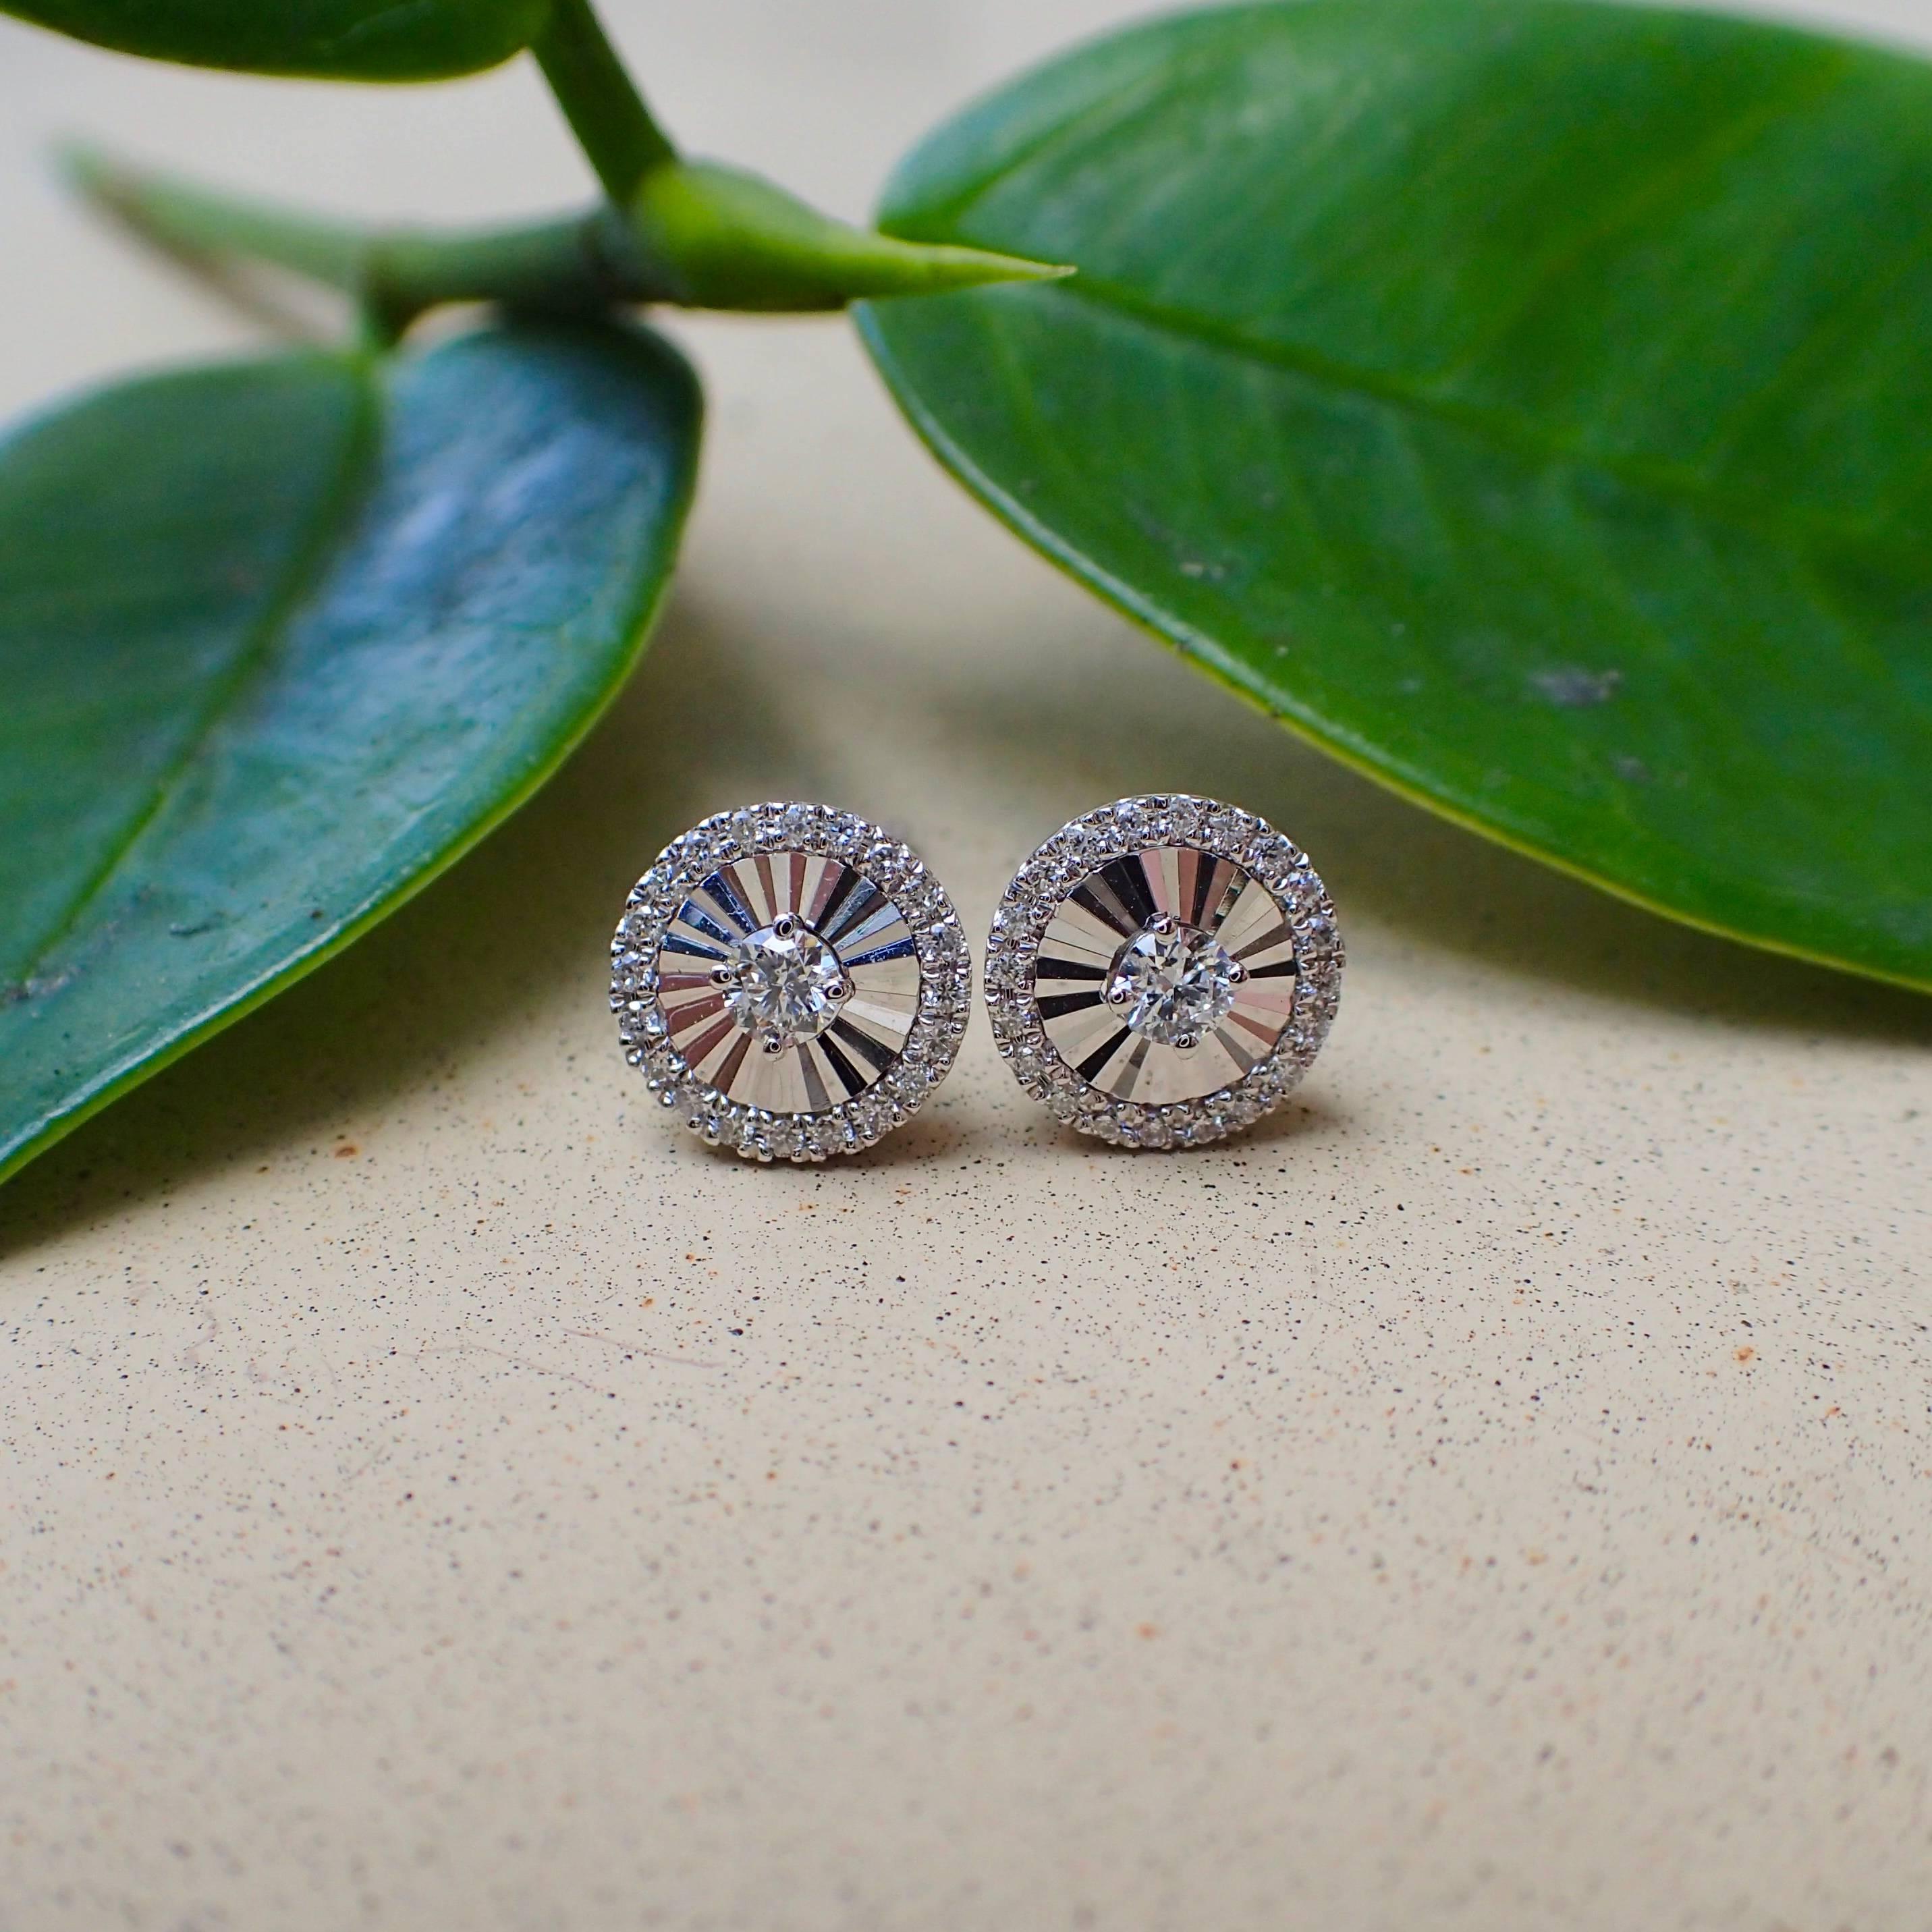 A pair of 18k white gold stud earrings are set with forty-two (42) Round Brilliant Cut diamonds with Clarity Grade VS and Color Grade G. The earrings have a machine-cut faceted fan pattern and have posts and clutches. The earrings weigh 1.9 grams